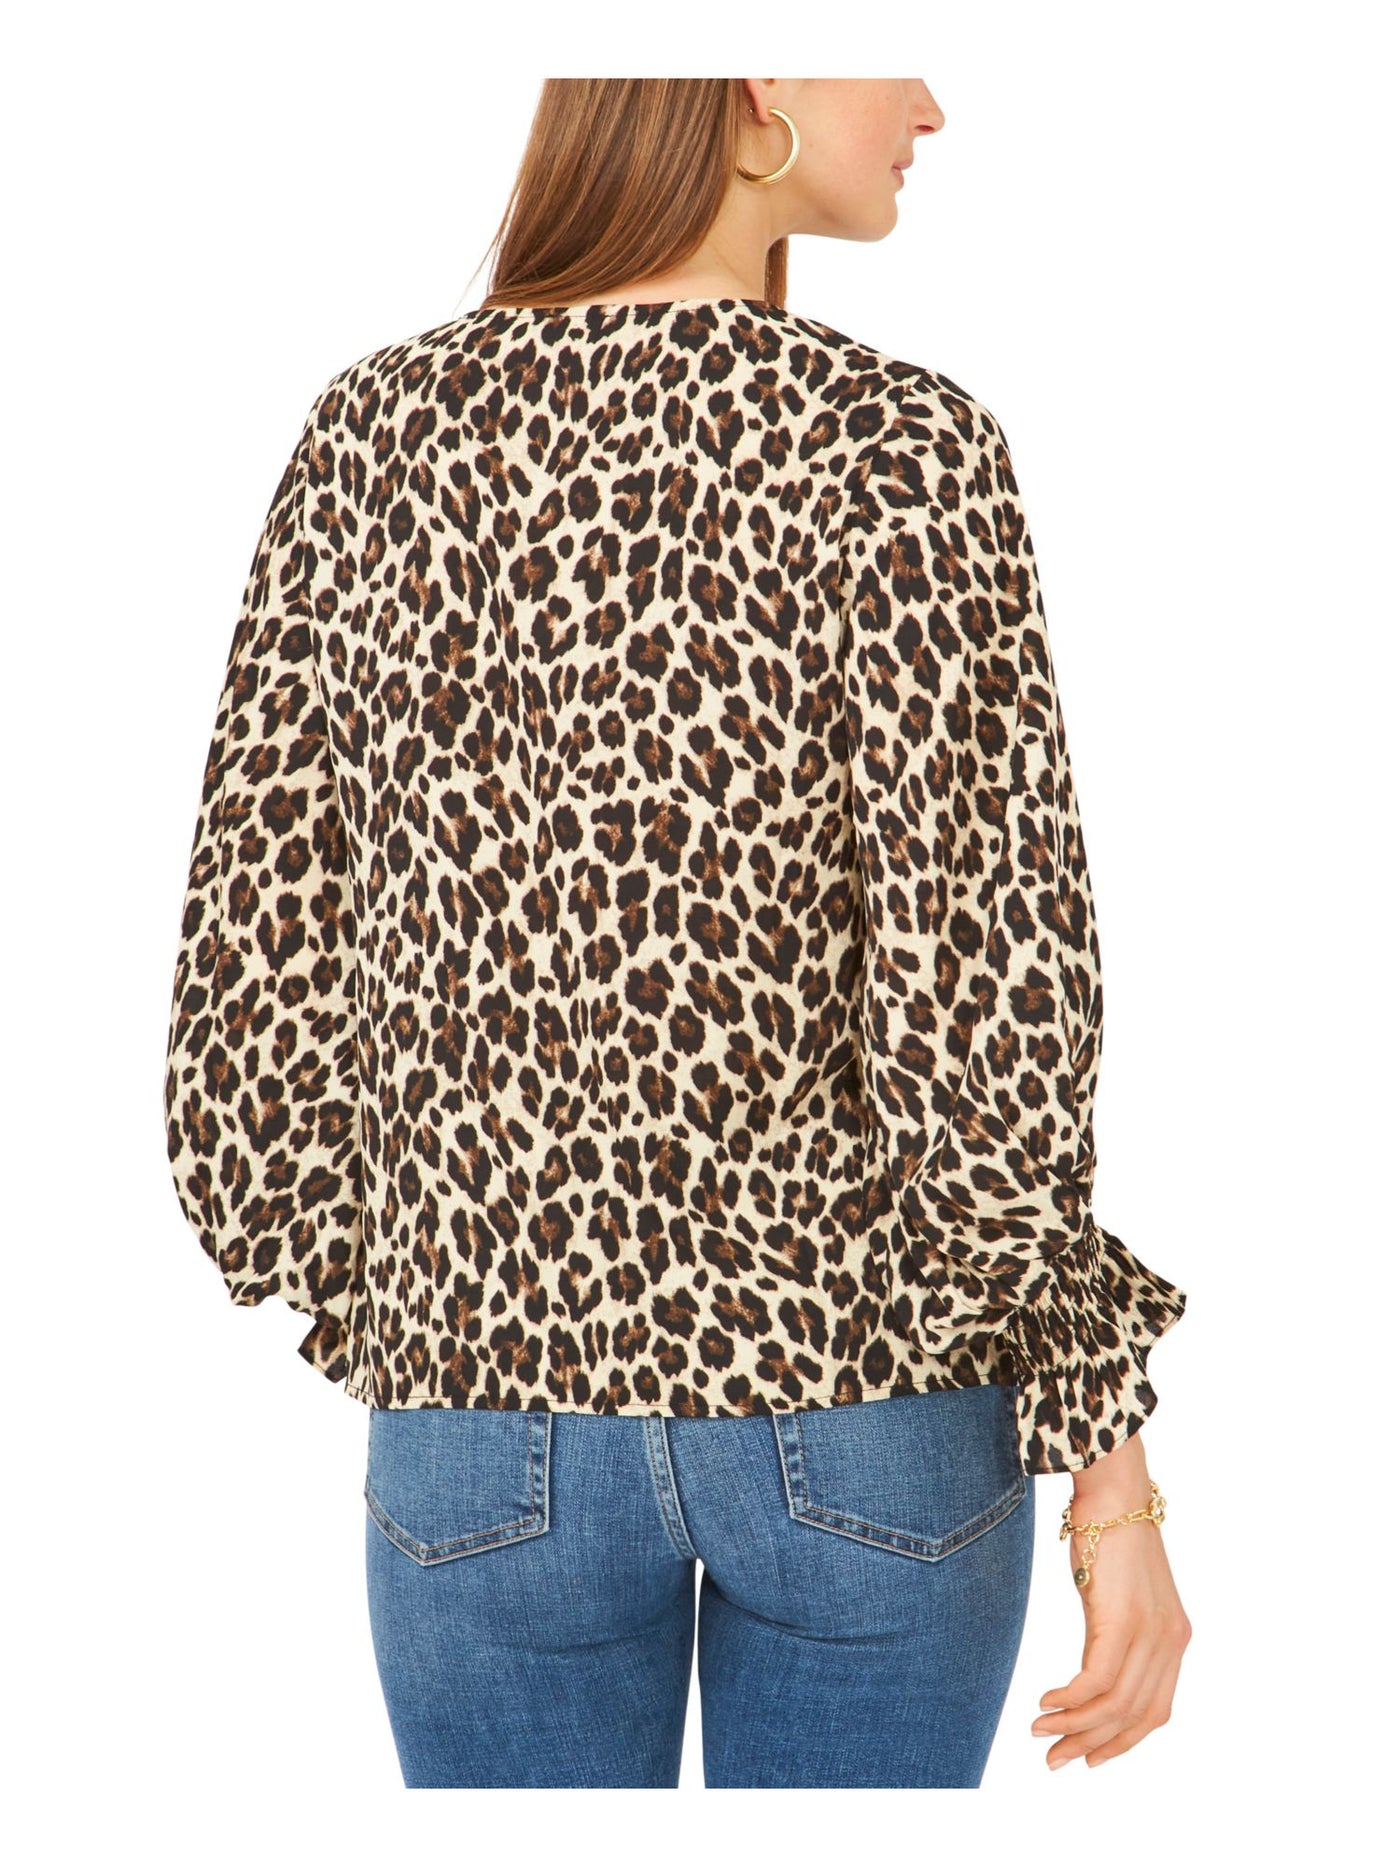 VINCE CAMUTO Womens Beige Smocked Bell Cuffs Animal Print Long Sleeve V Neck Top XS